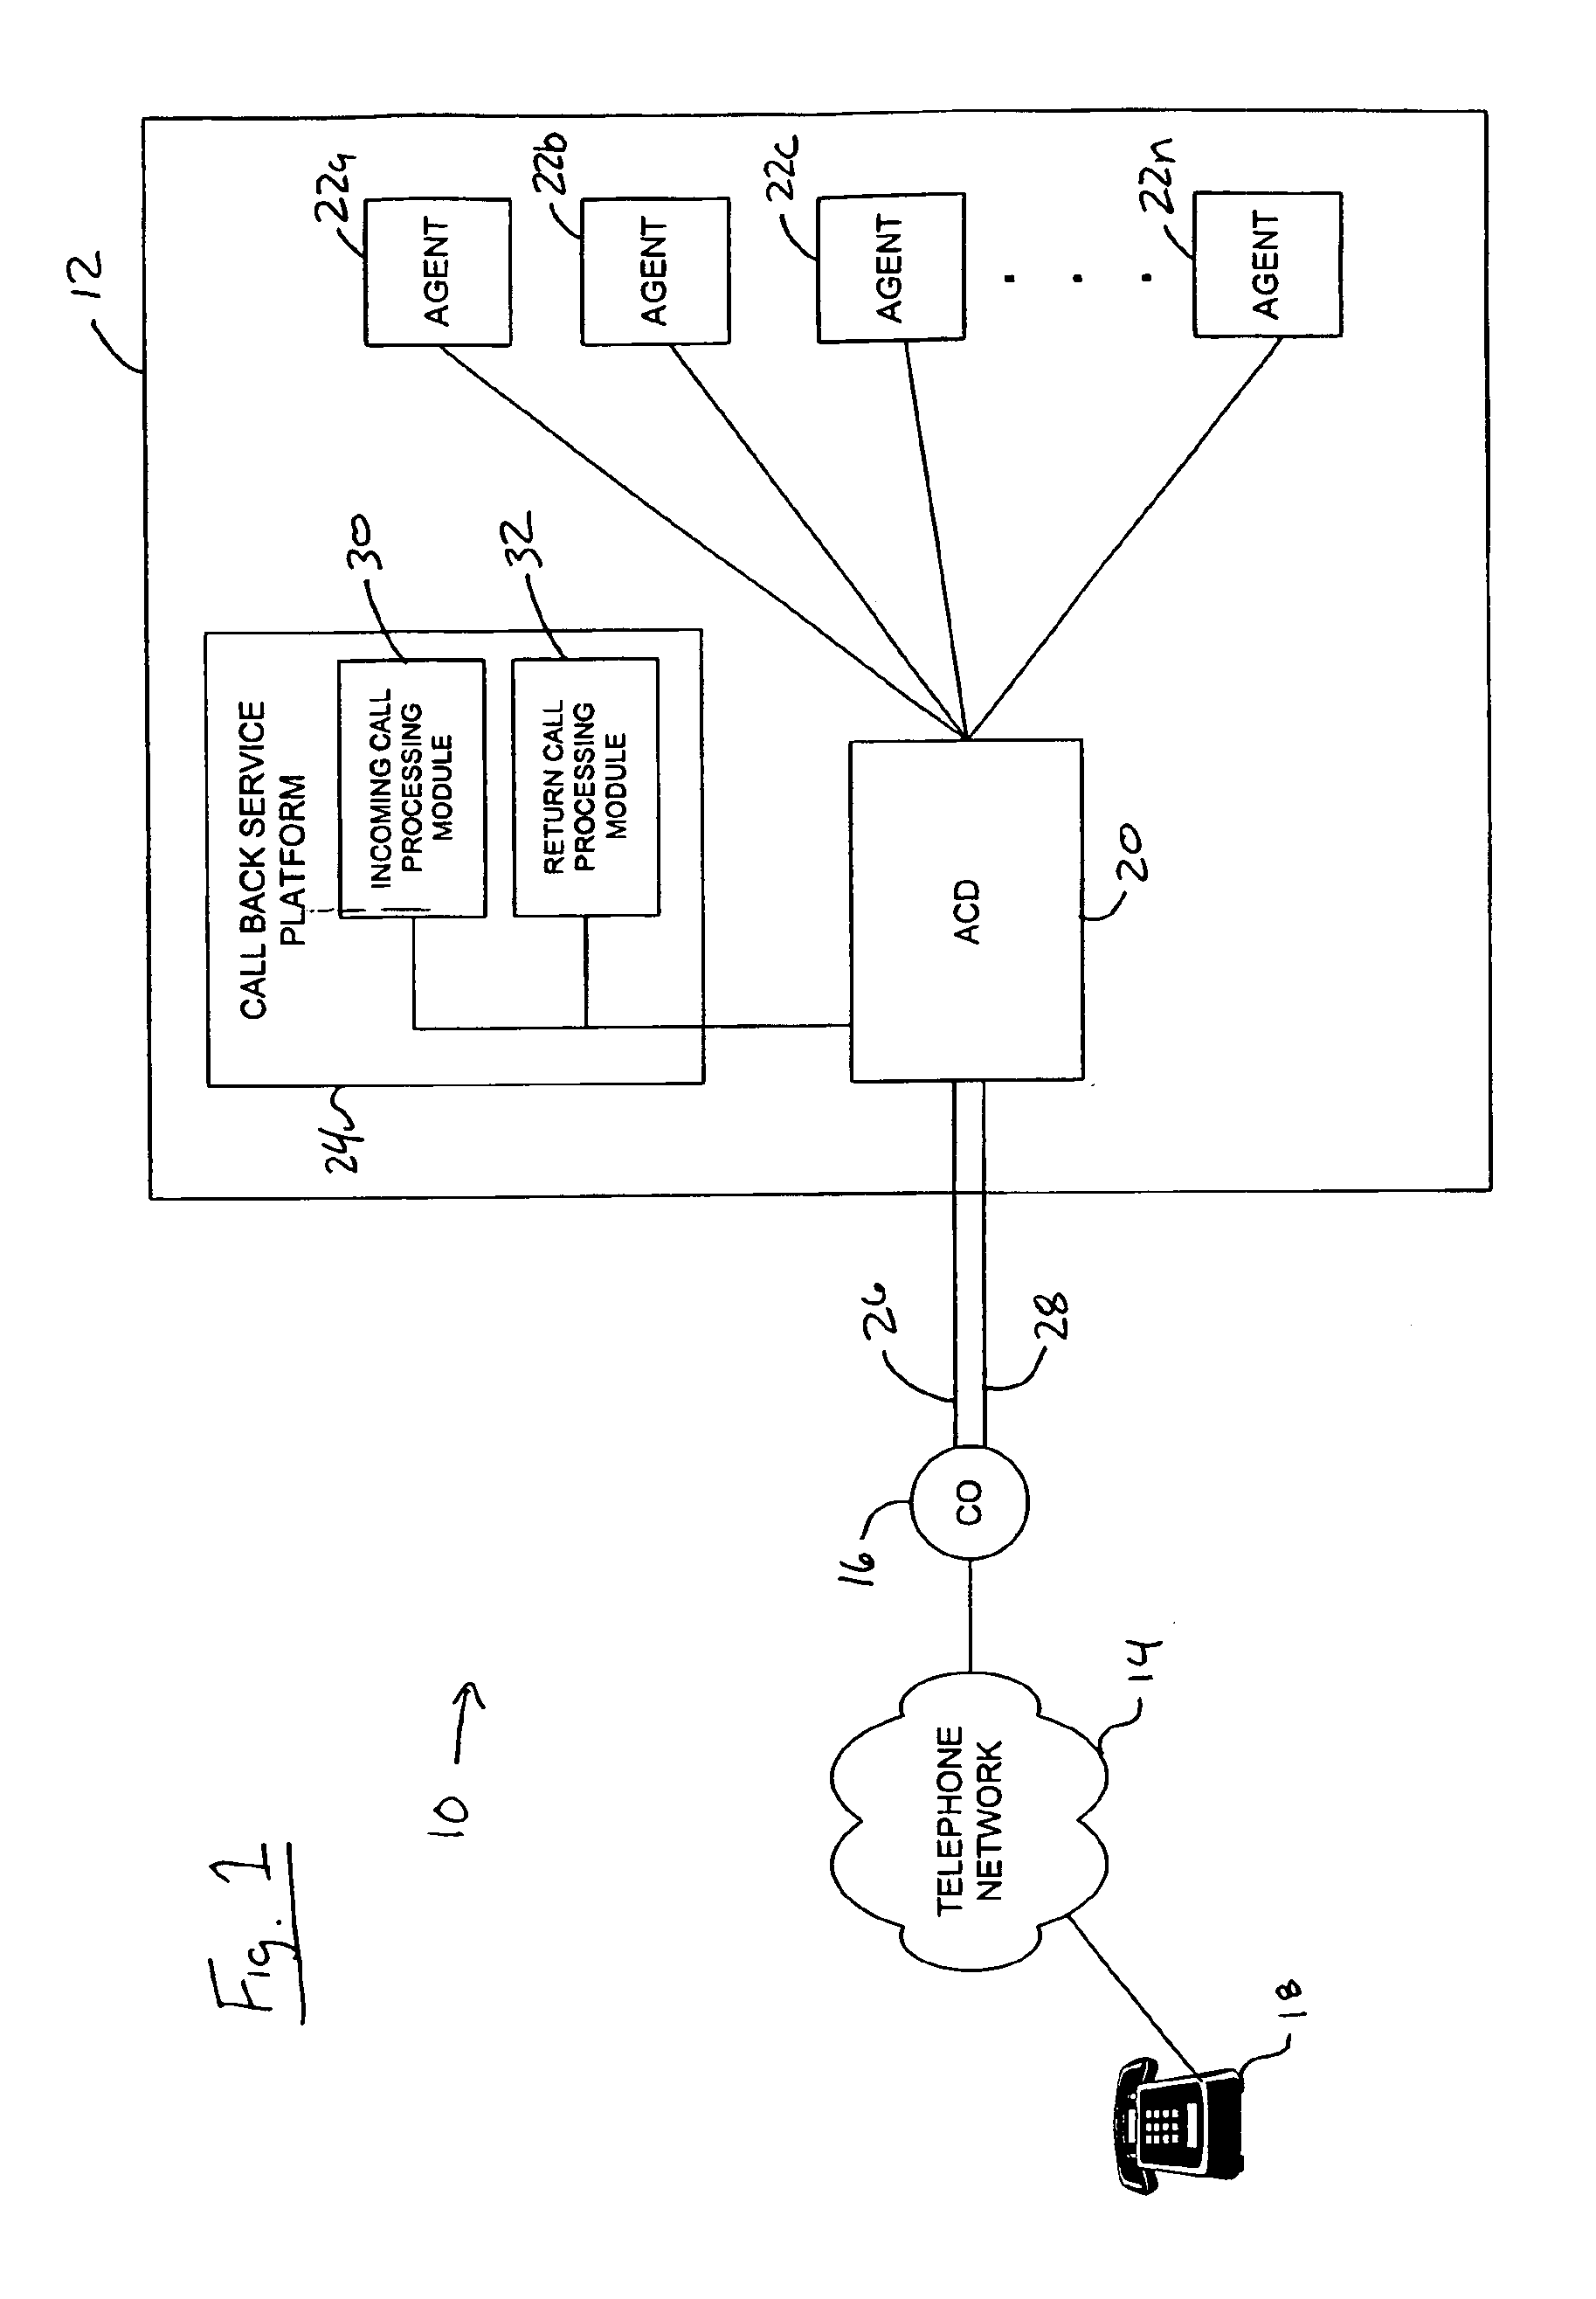 System and method for providing a call back option for callers to a call center